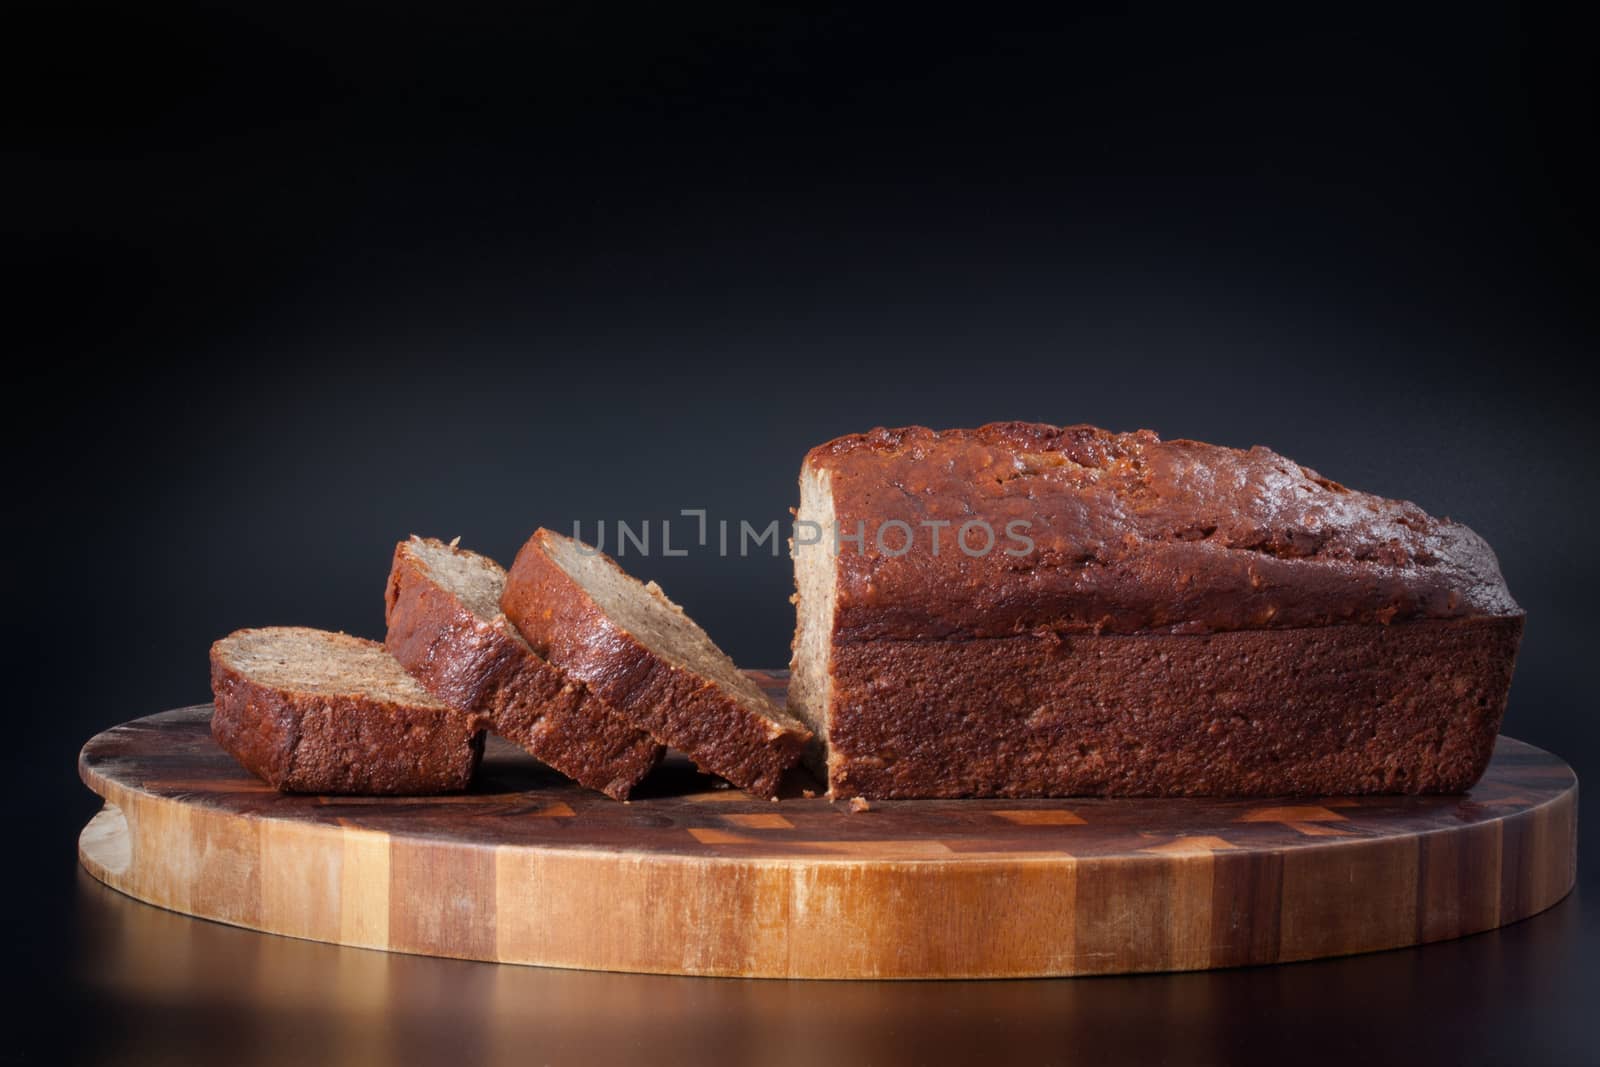 sliced banana bread on a wood plank by lanalanglois